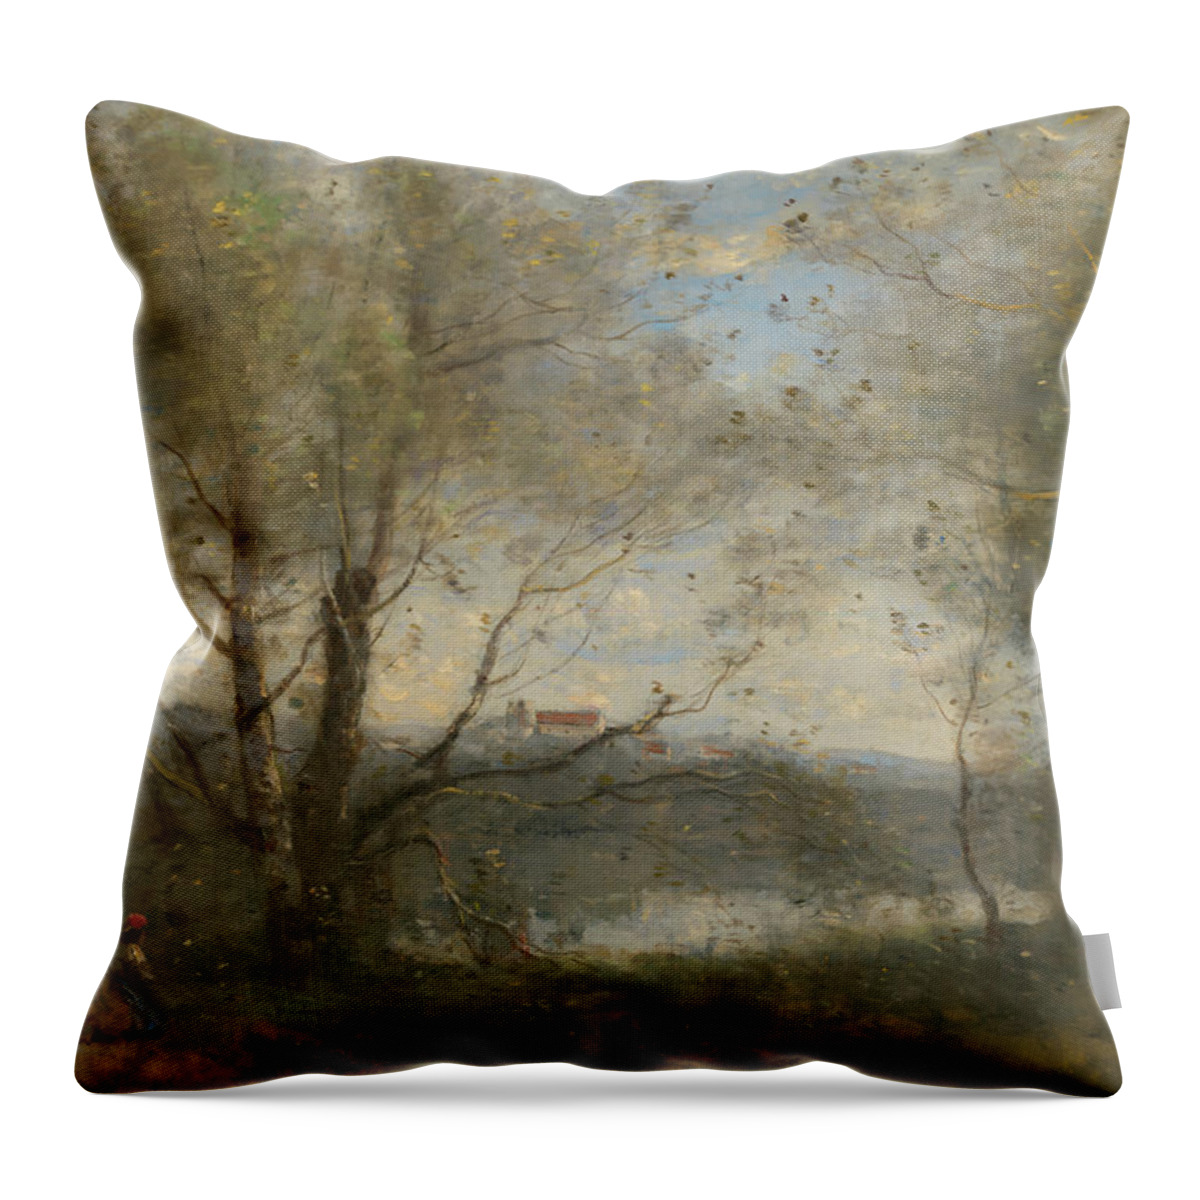 Painting Throw Pillow featuring the painting A Pond Seen Through The Trees by Mountain Dreams